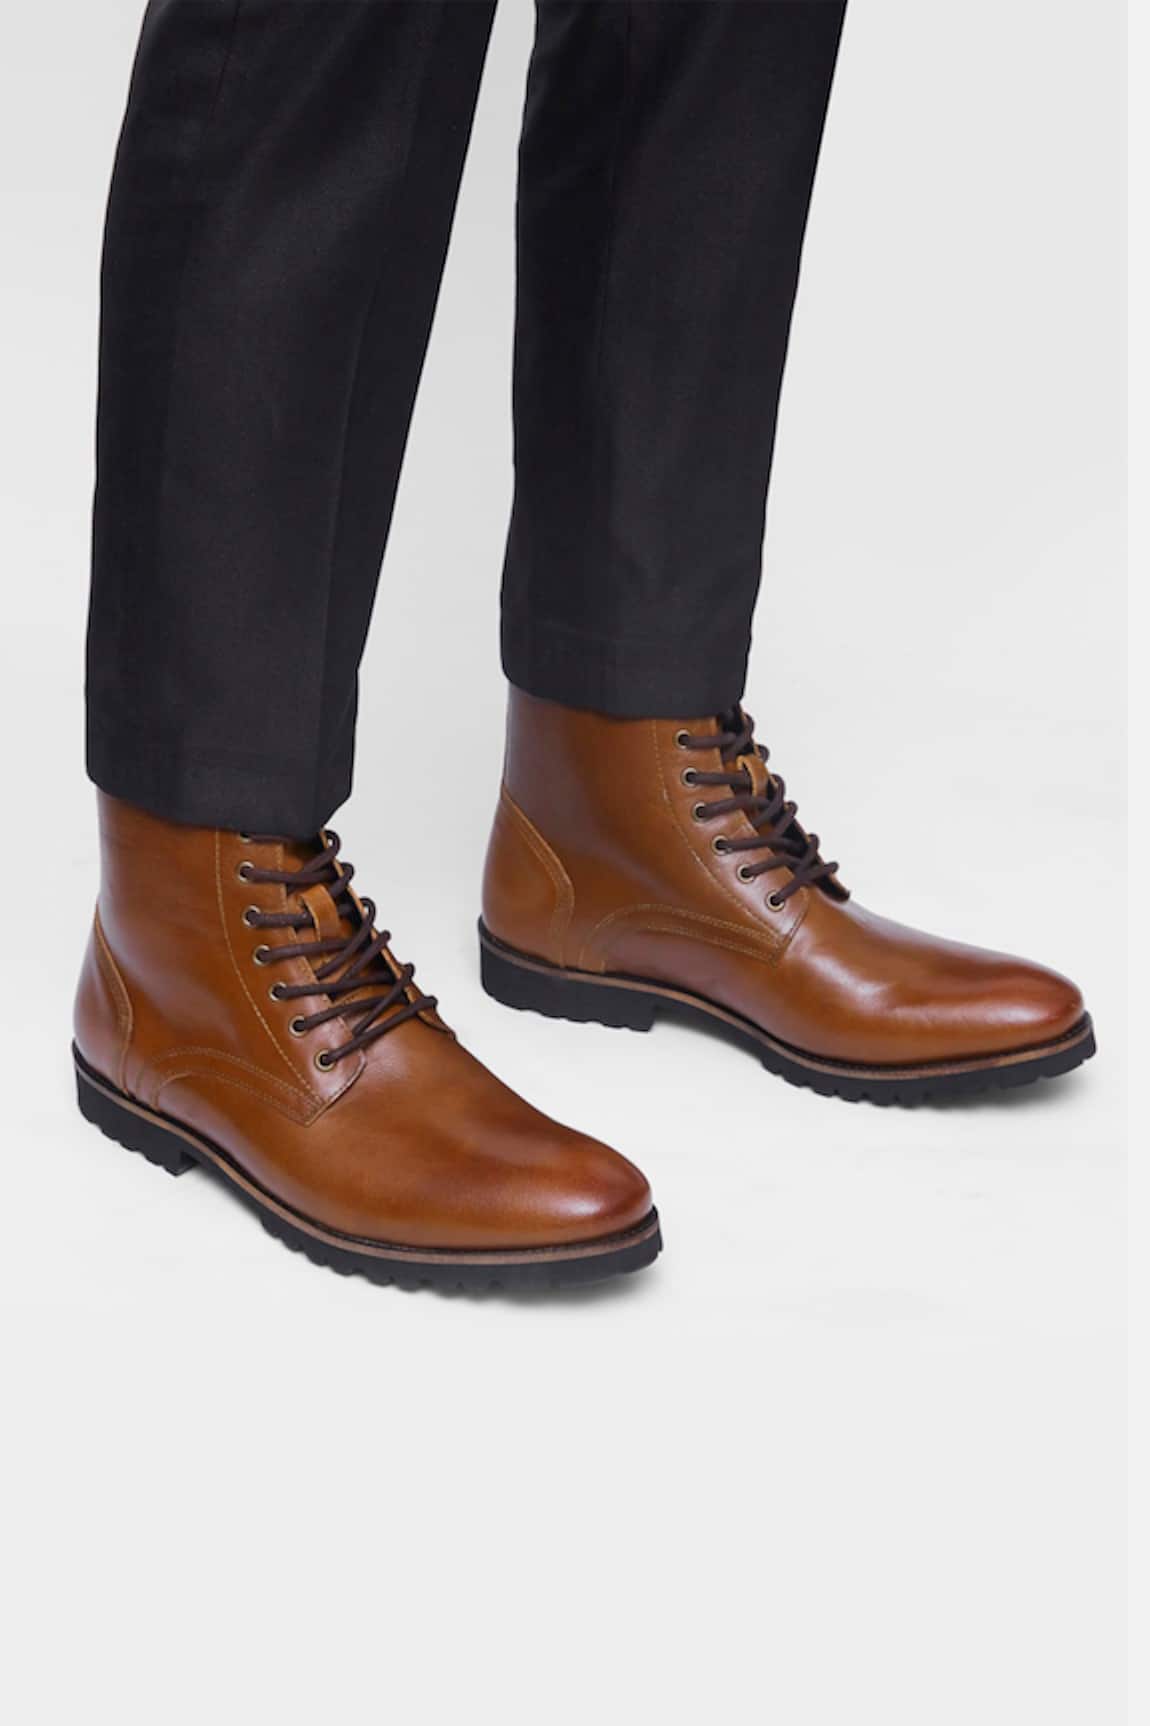 Hats Off Accessories Genuine Leather Lace-Up Boots